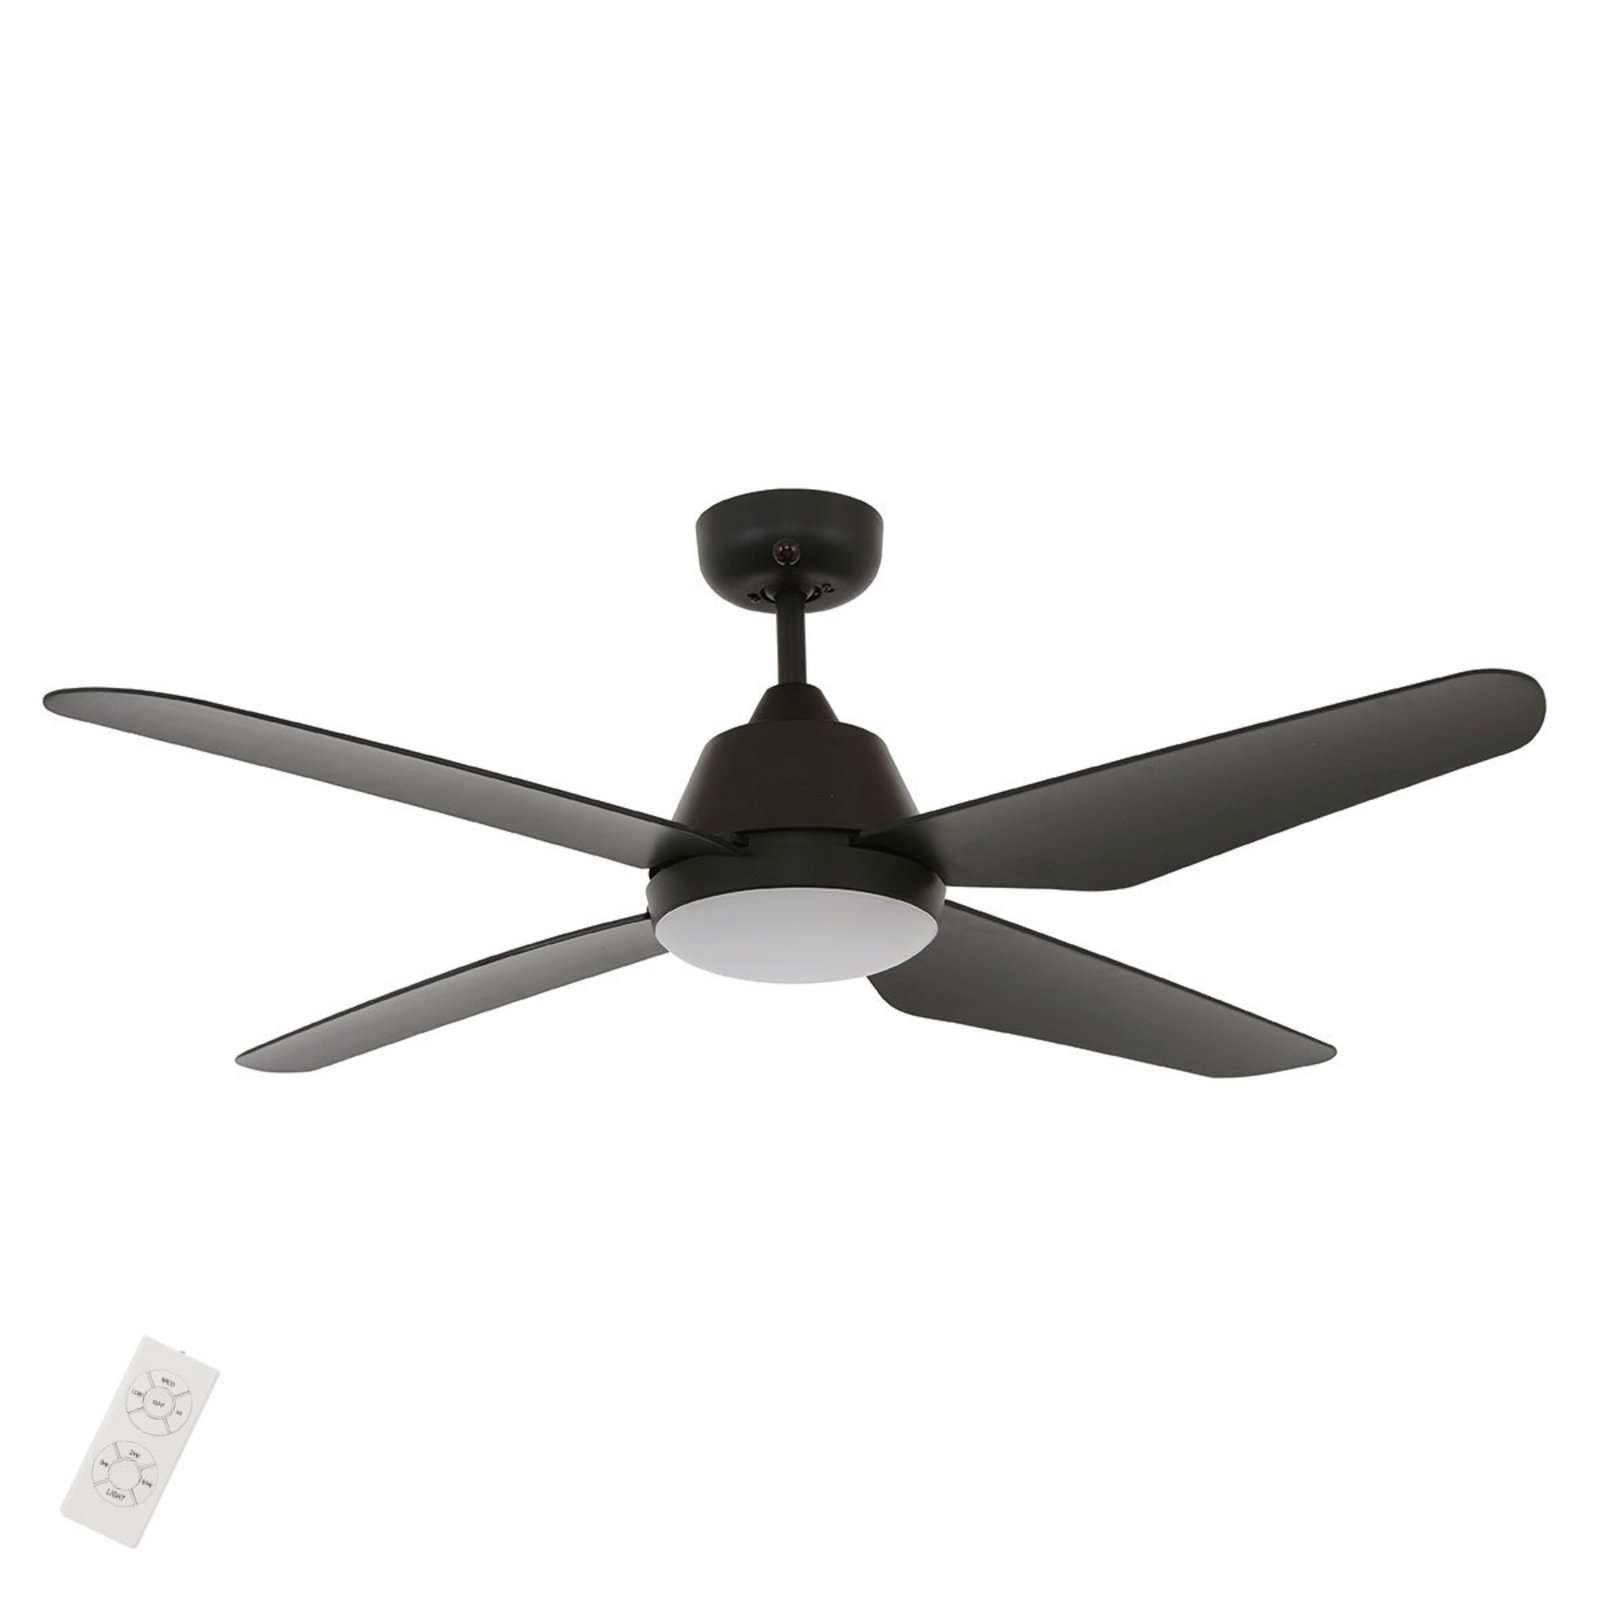 Aria ceiling fan with LED light, black